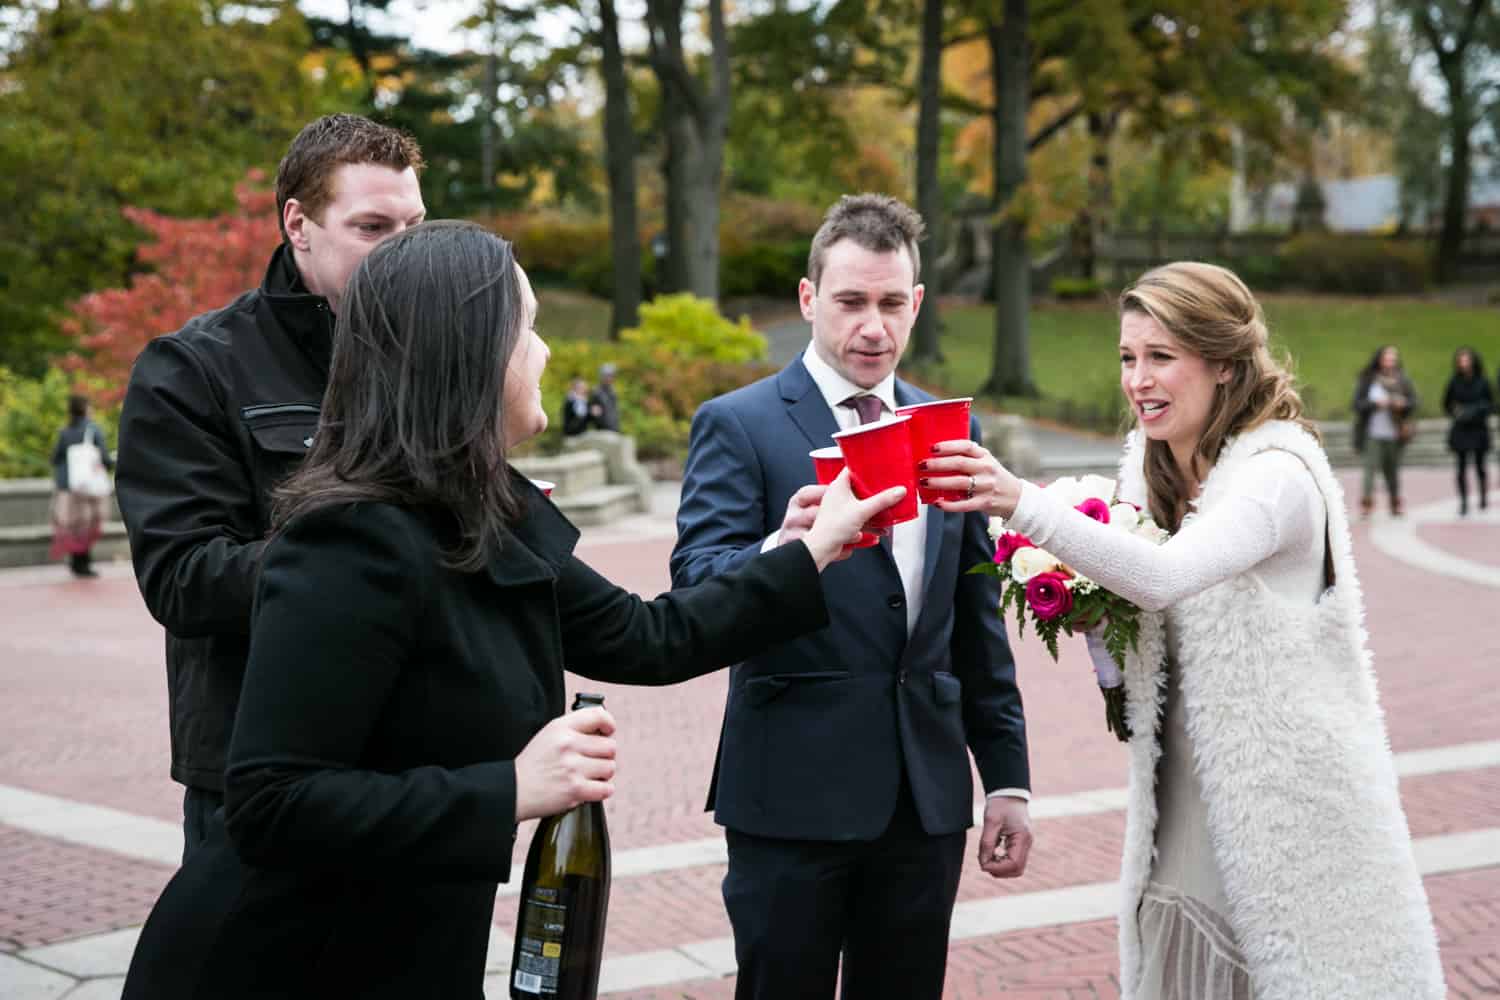 Bride, groom, and guests toasting with red plastic cups